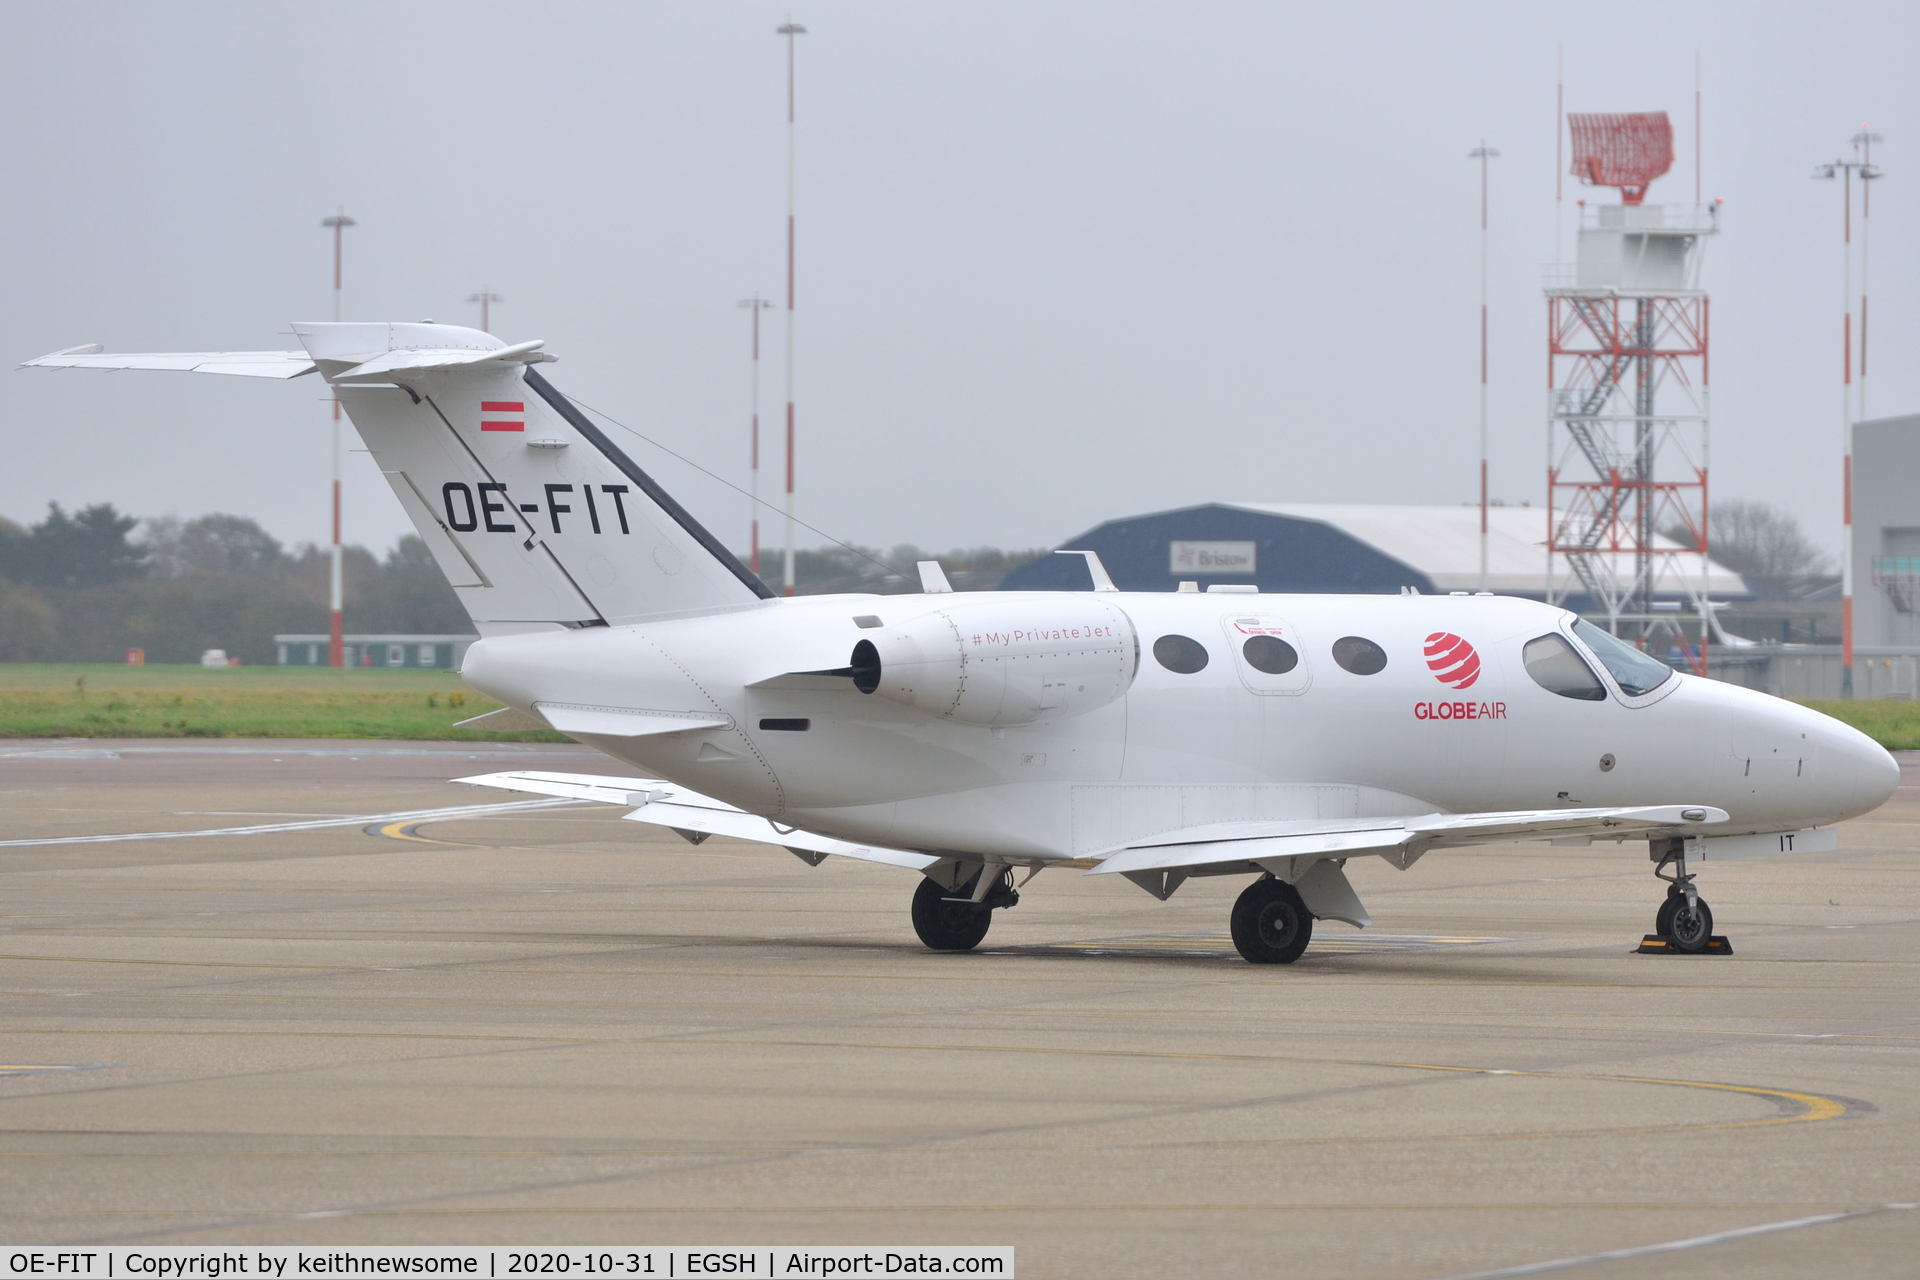 OE-FIT, 2010 Cessna 510 Citation Mustang Citation Mustang C/N 510-0319, Arrived at Norwich from Berlin.